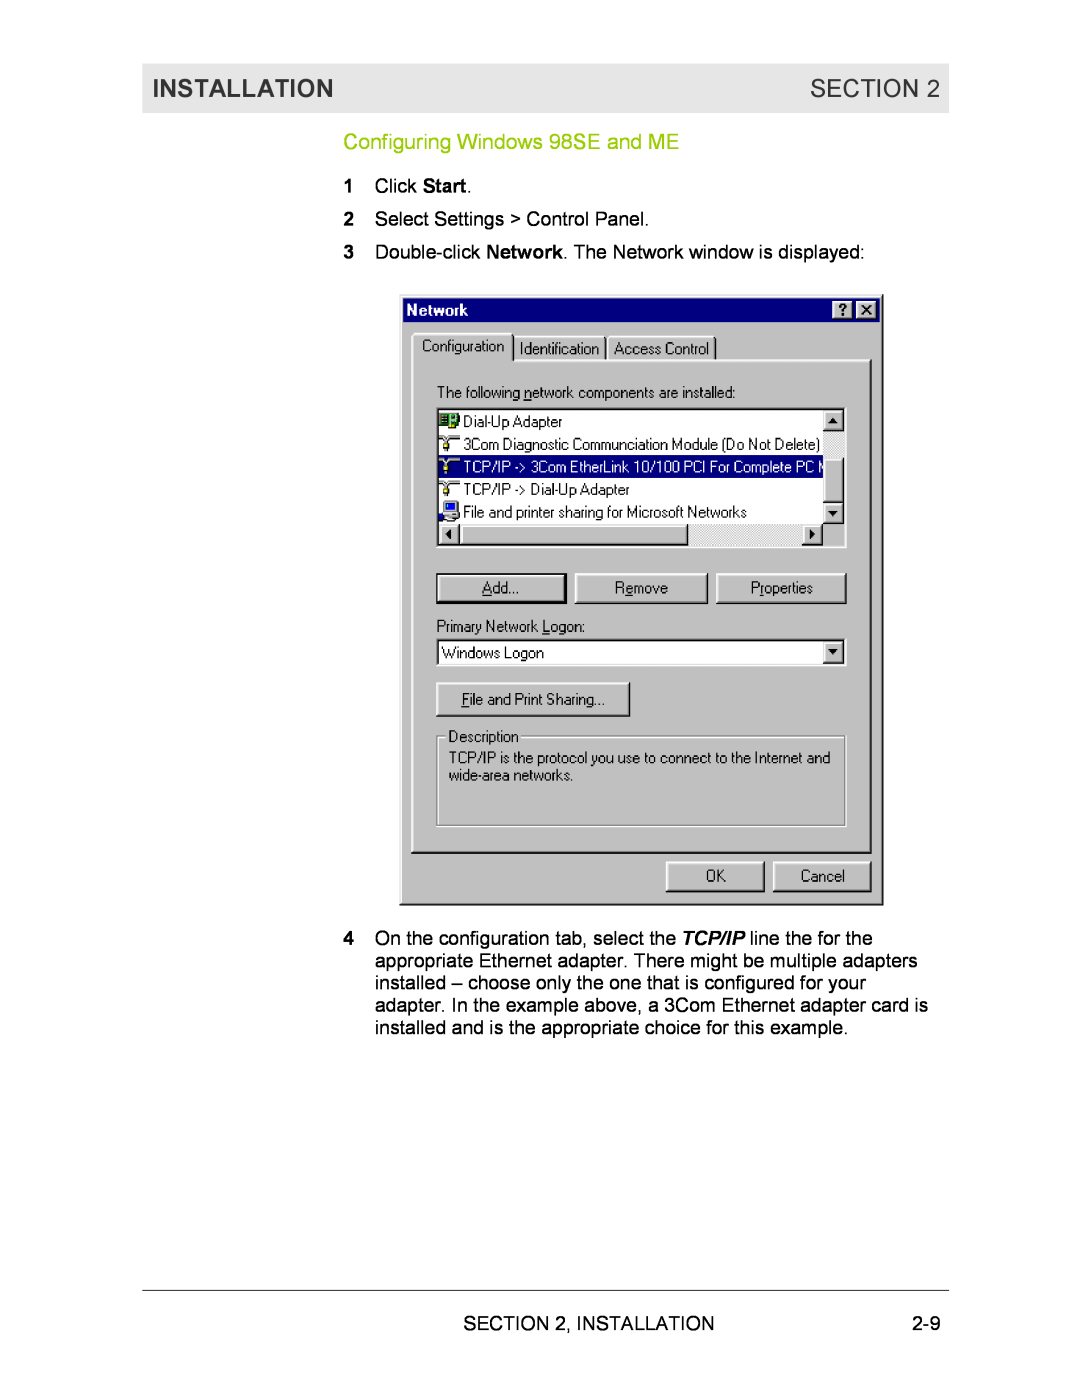 Motorola BR700 manual Configuring Windows 98SE and ME, Installation, Section 